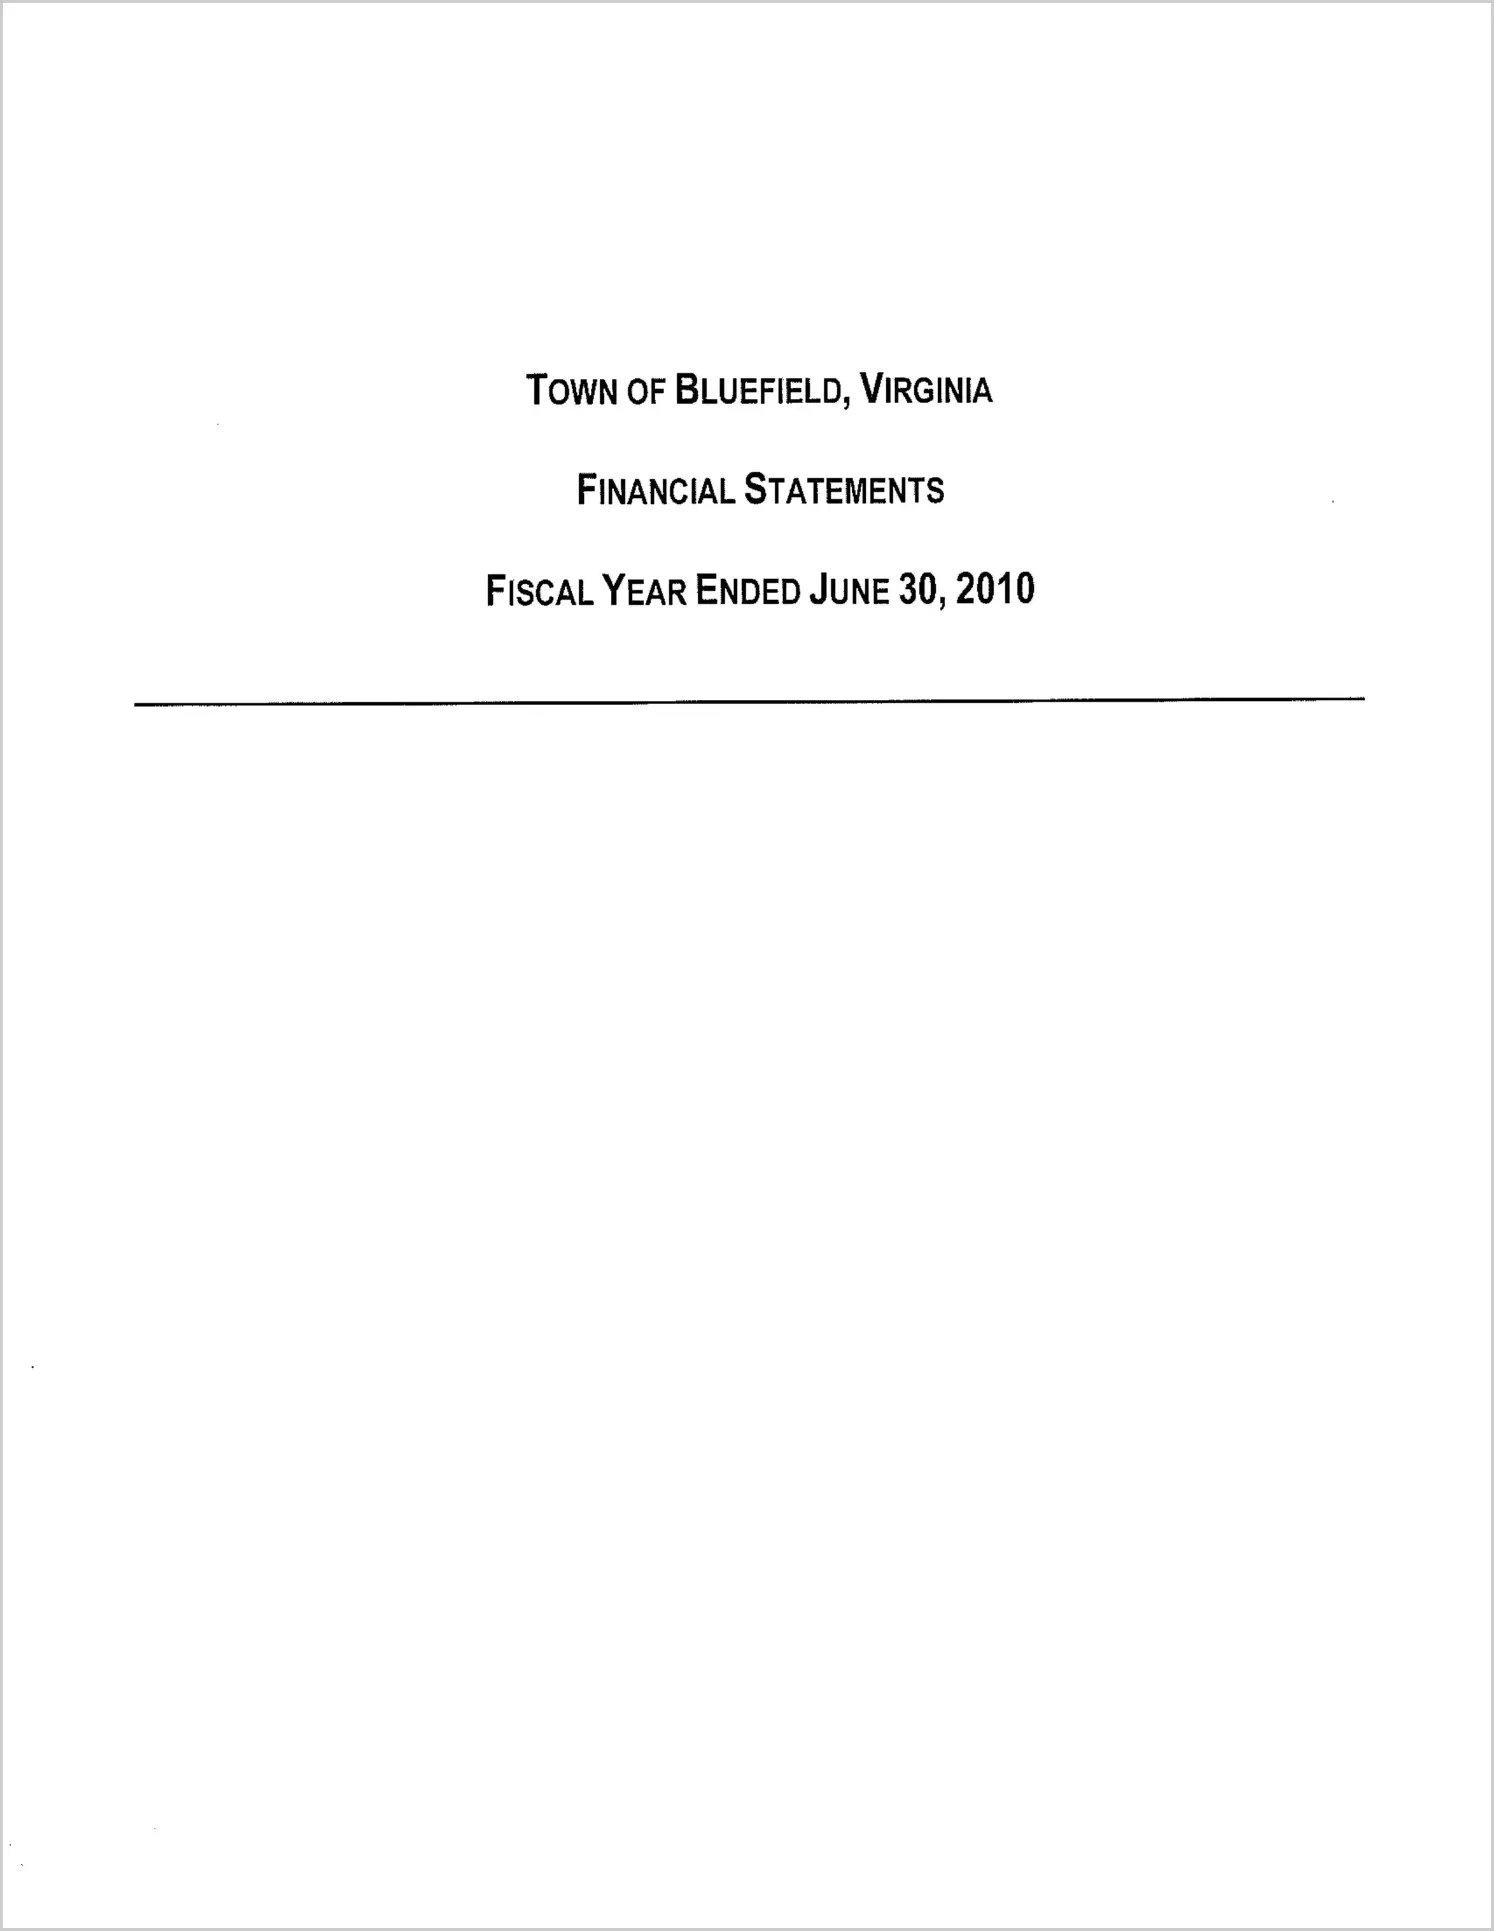 2010 Annual Financial Report for Town of Bluefield